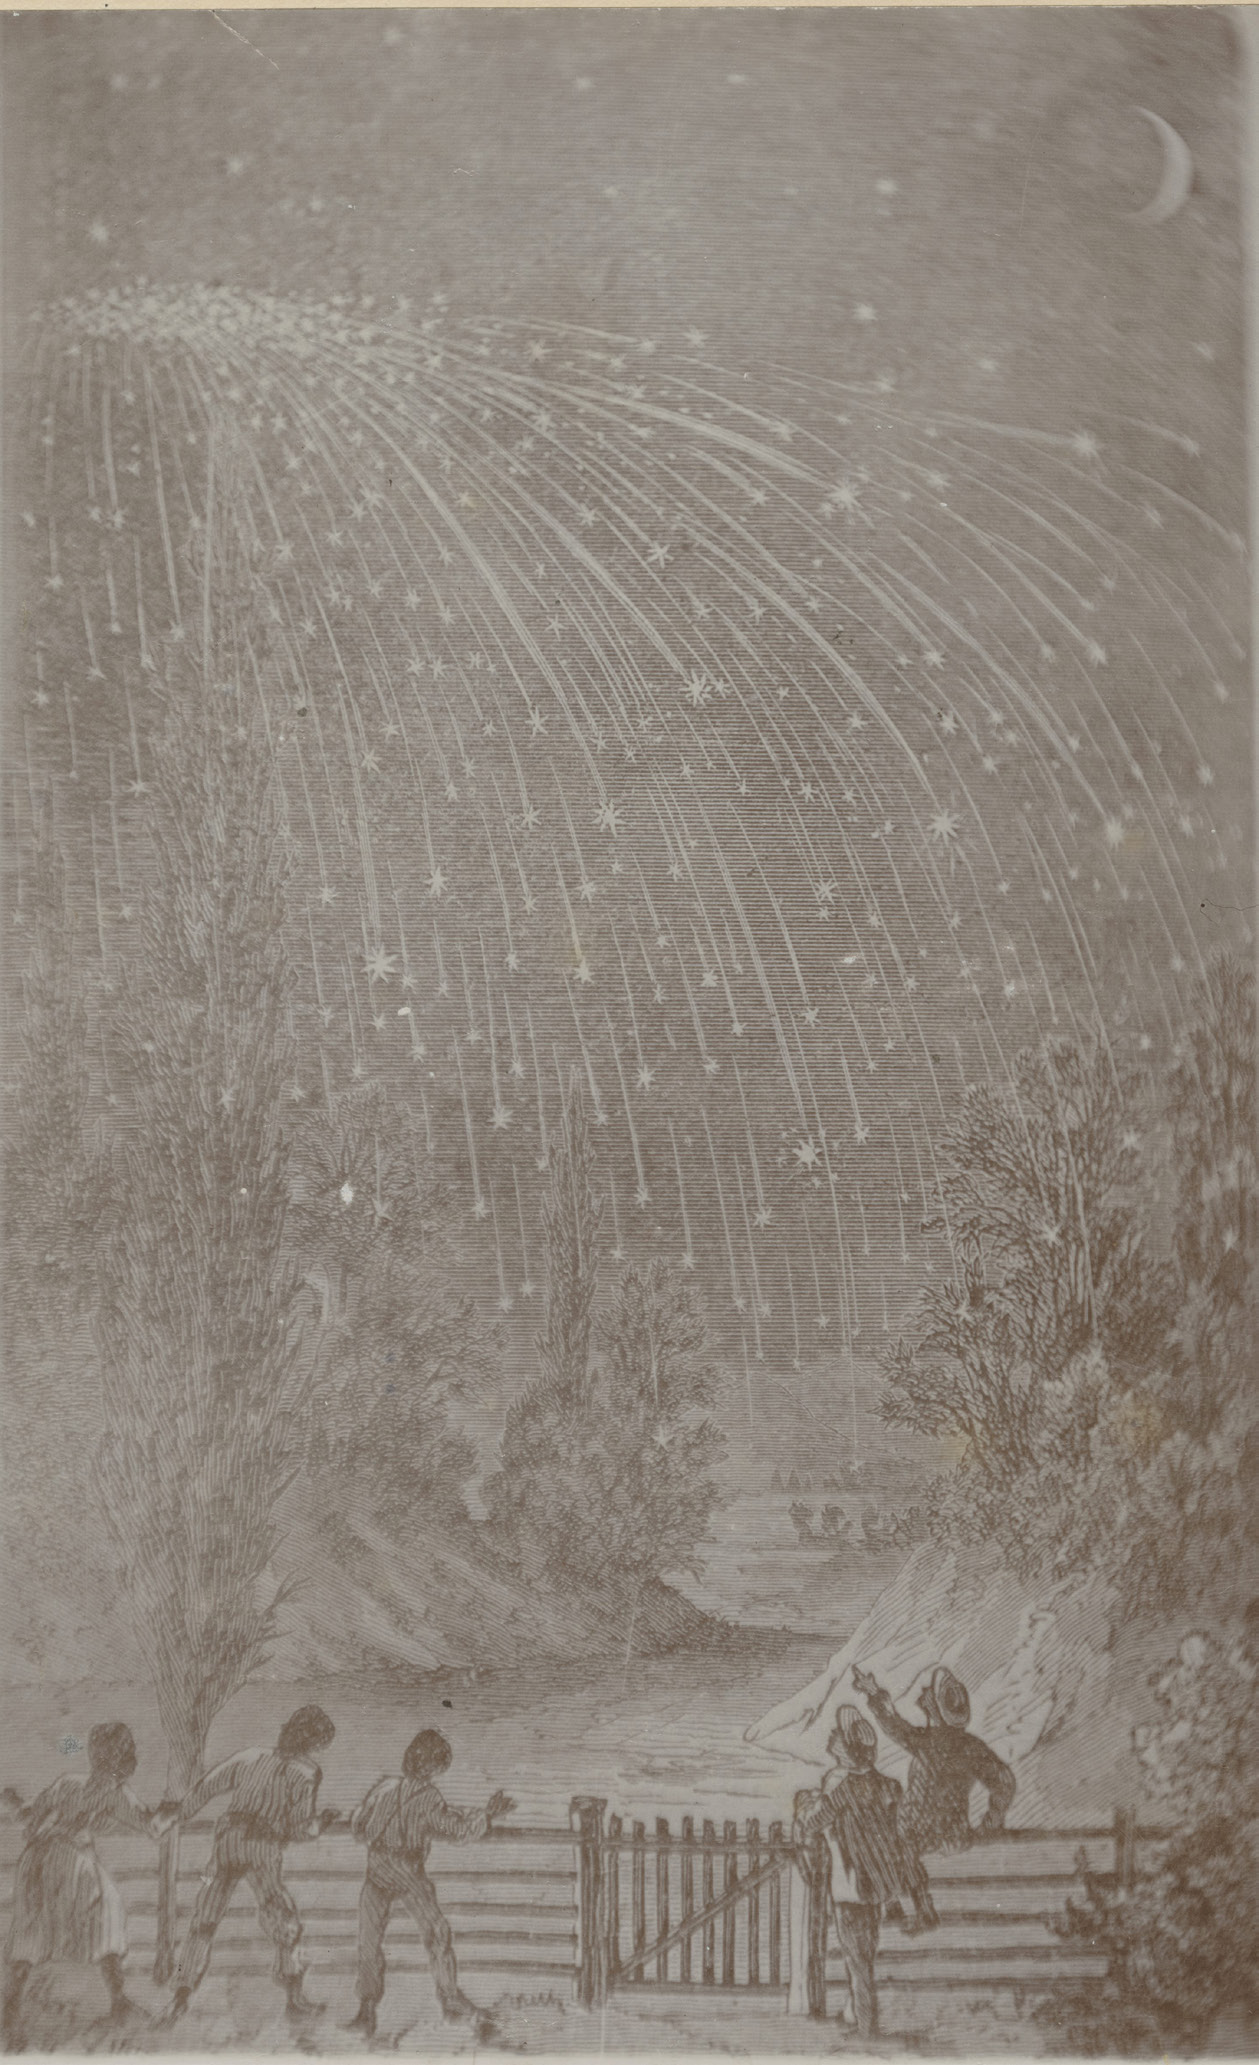 Unknown artist, The Falling of the Stars, Jackson County, Missouri, November 13, 1833 (ca. 1882–84), photograph of panorama. Courtesy of Church History Library.